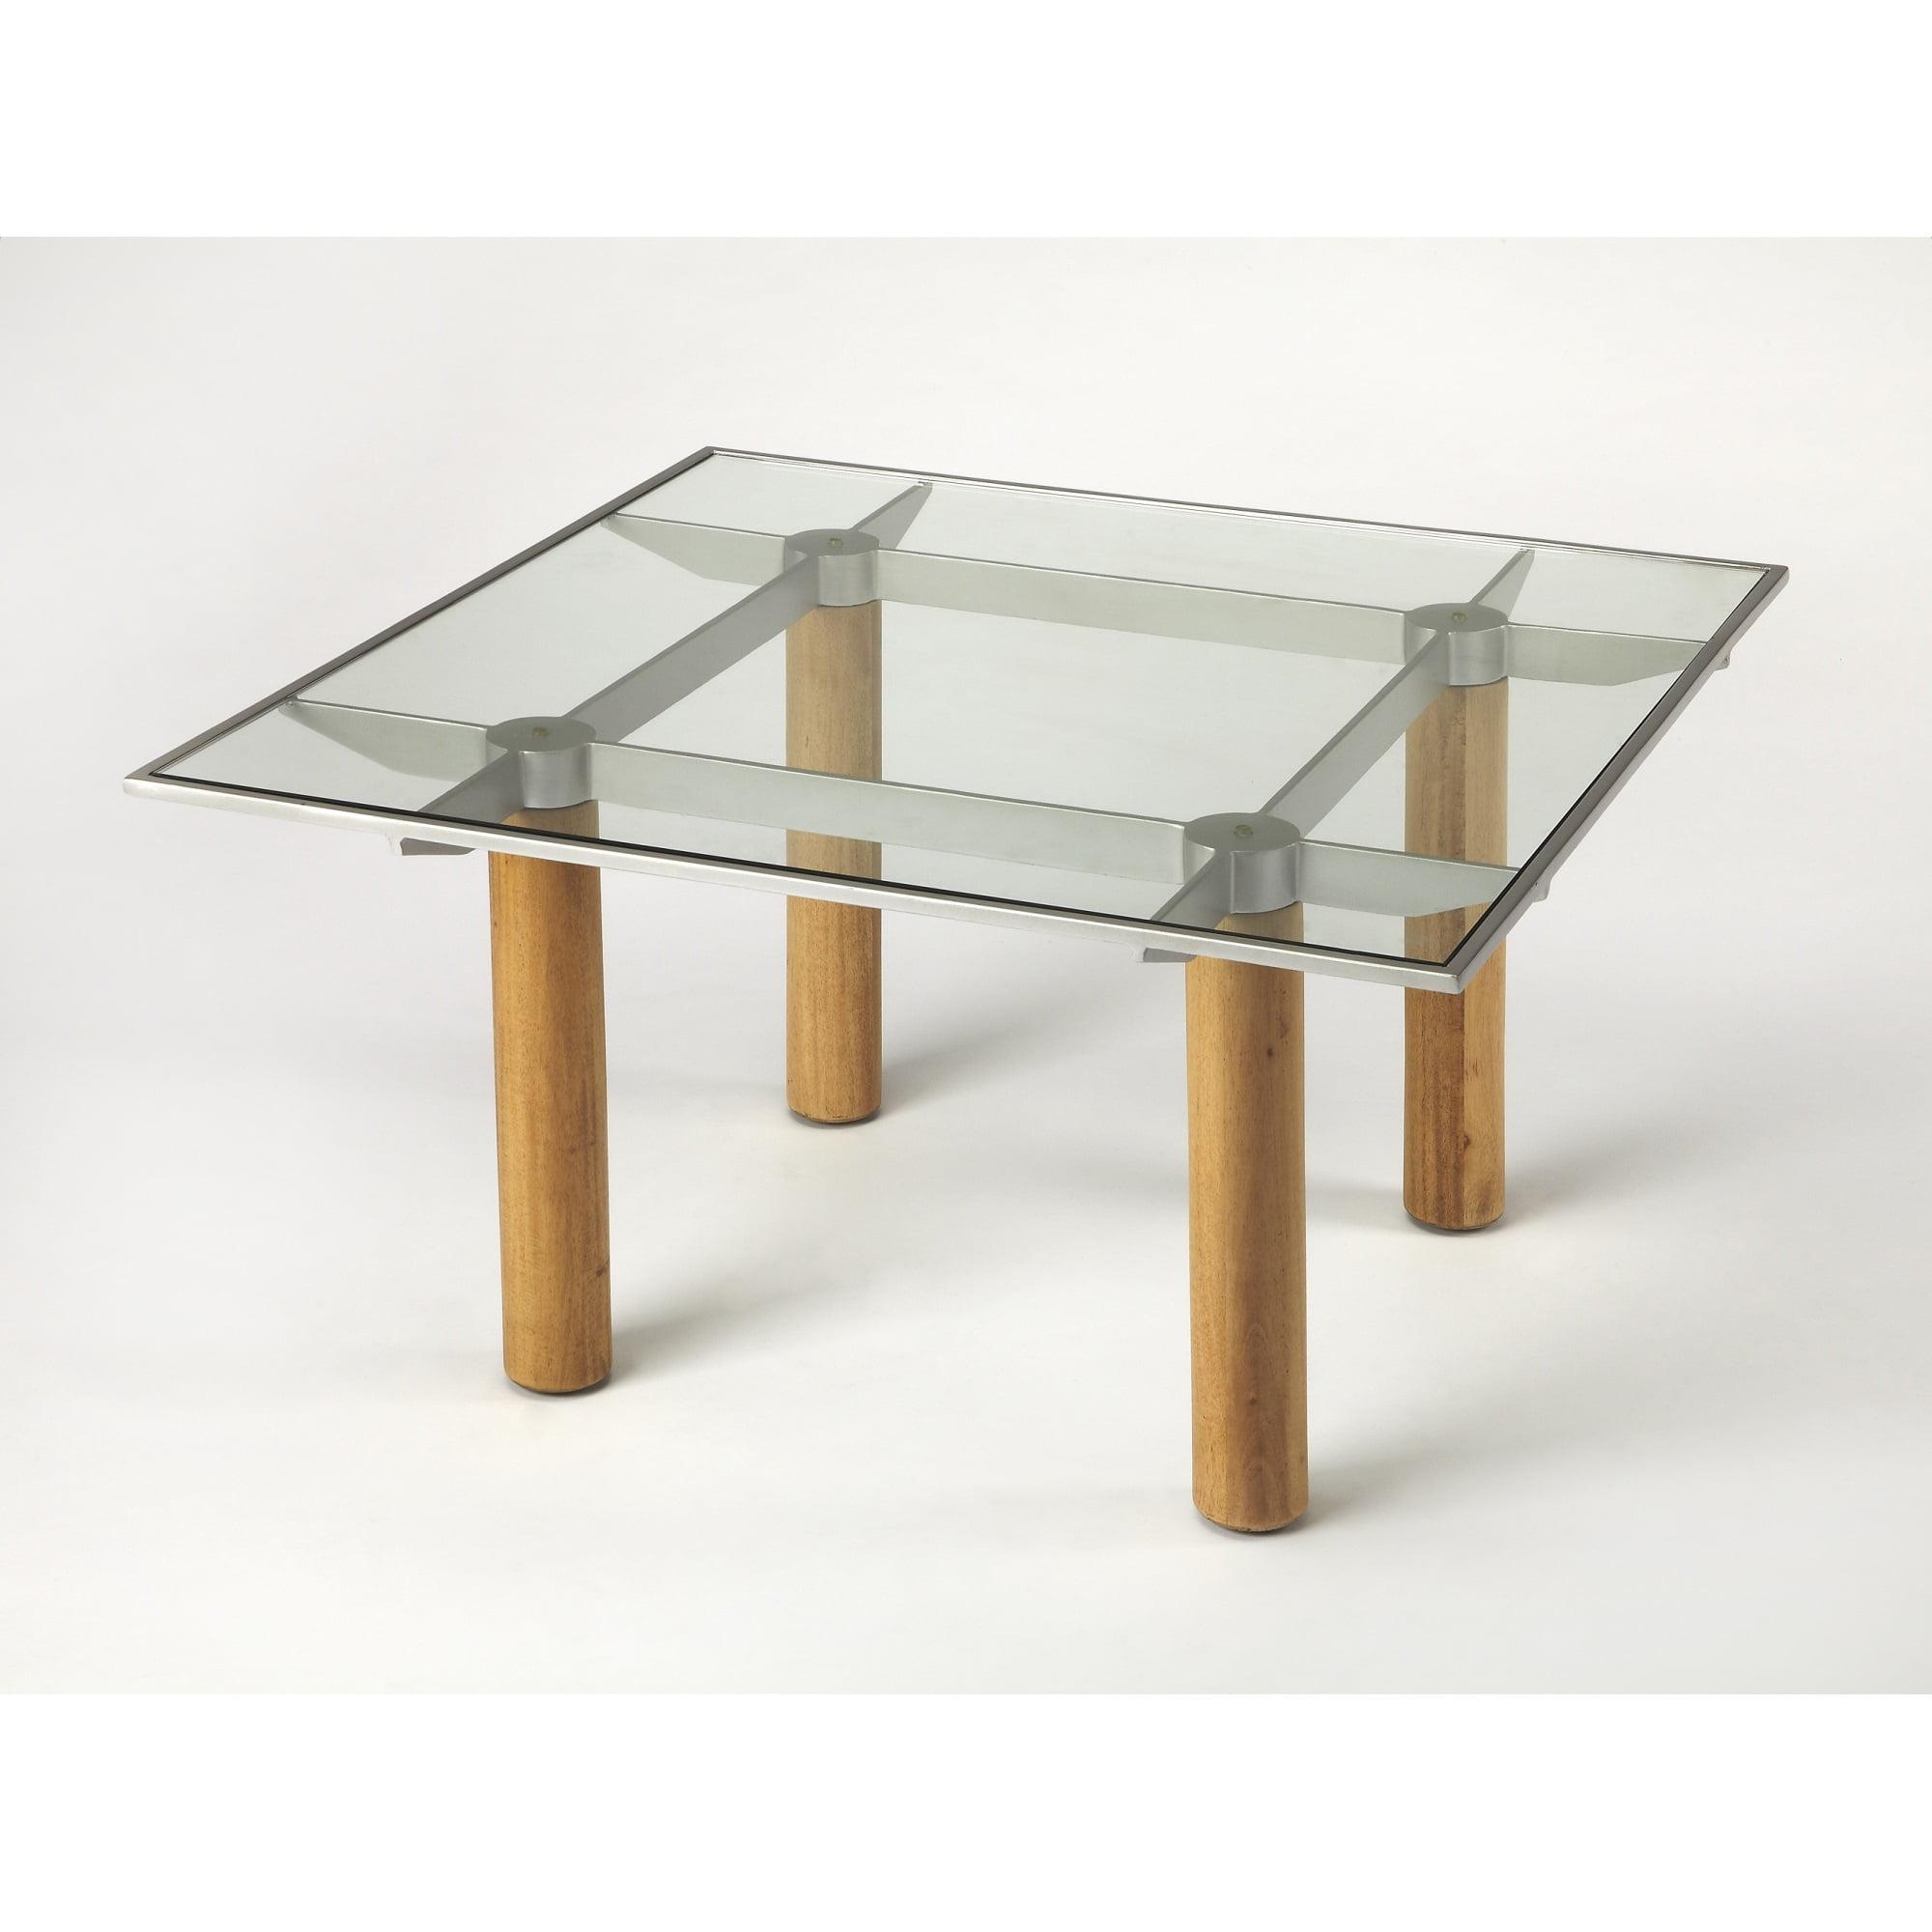 Cirrus Square Coffee Table in Gemelina Wood, Metal, and Glass